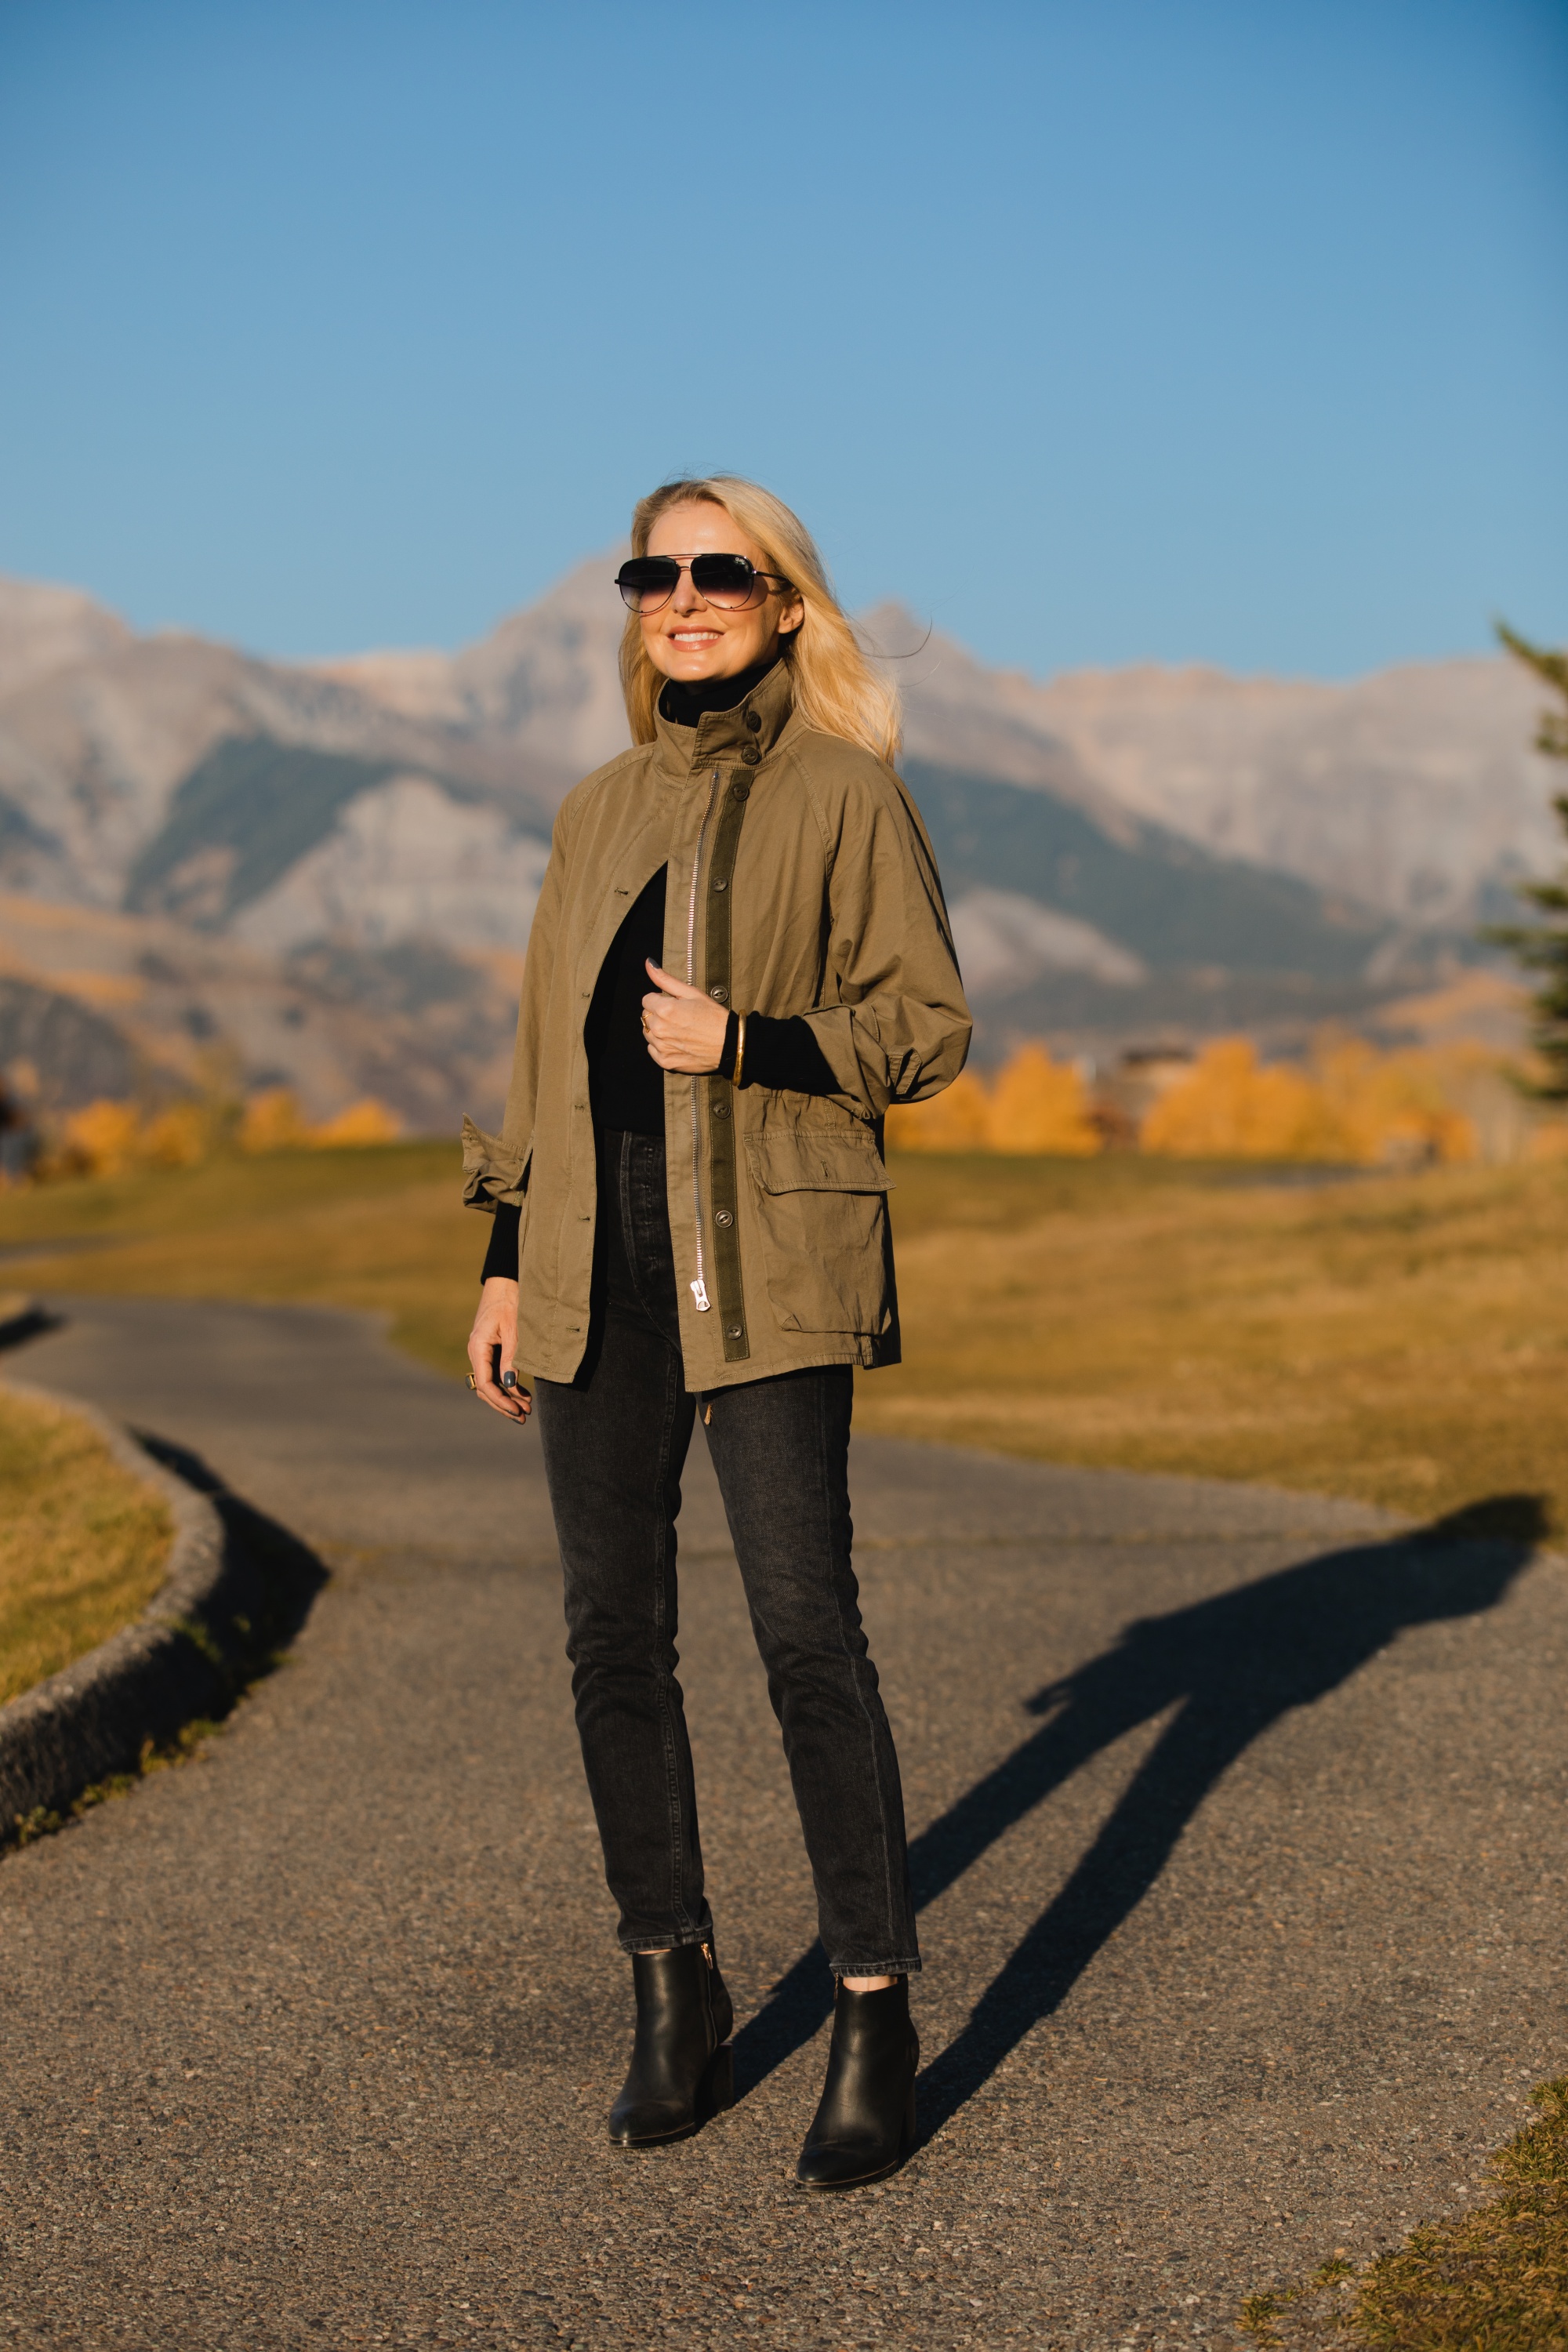 How To Wear A Cargo Jacket, Erin Busbee of Busbee Style wearing a green cargo jacket by rag & bone, black turtleneck puff sleeve cashmere sweater by Aqua, gray wash Nico slim fit jeans by Agolde, QUAY sunglasses, and Alexander Wang cutout booties in Telluride, Colorado